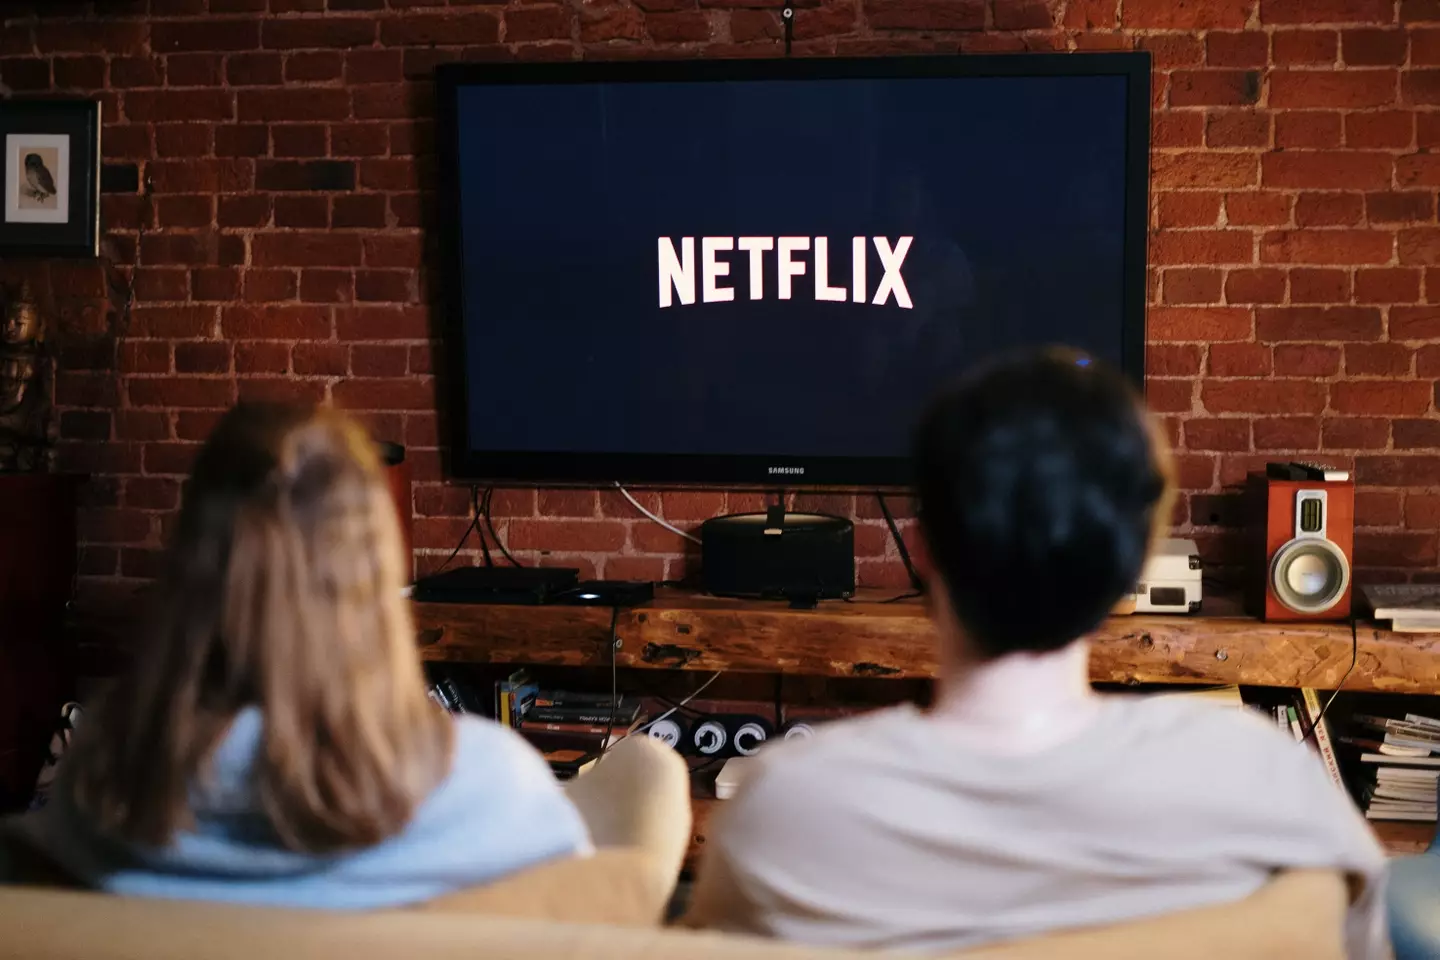 More changes are coming to Netflix.